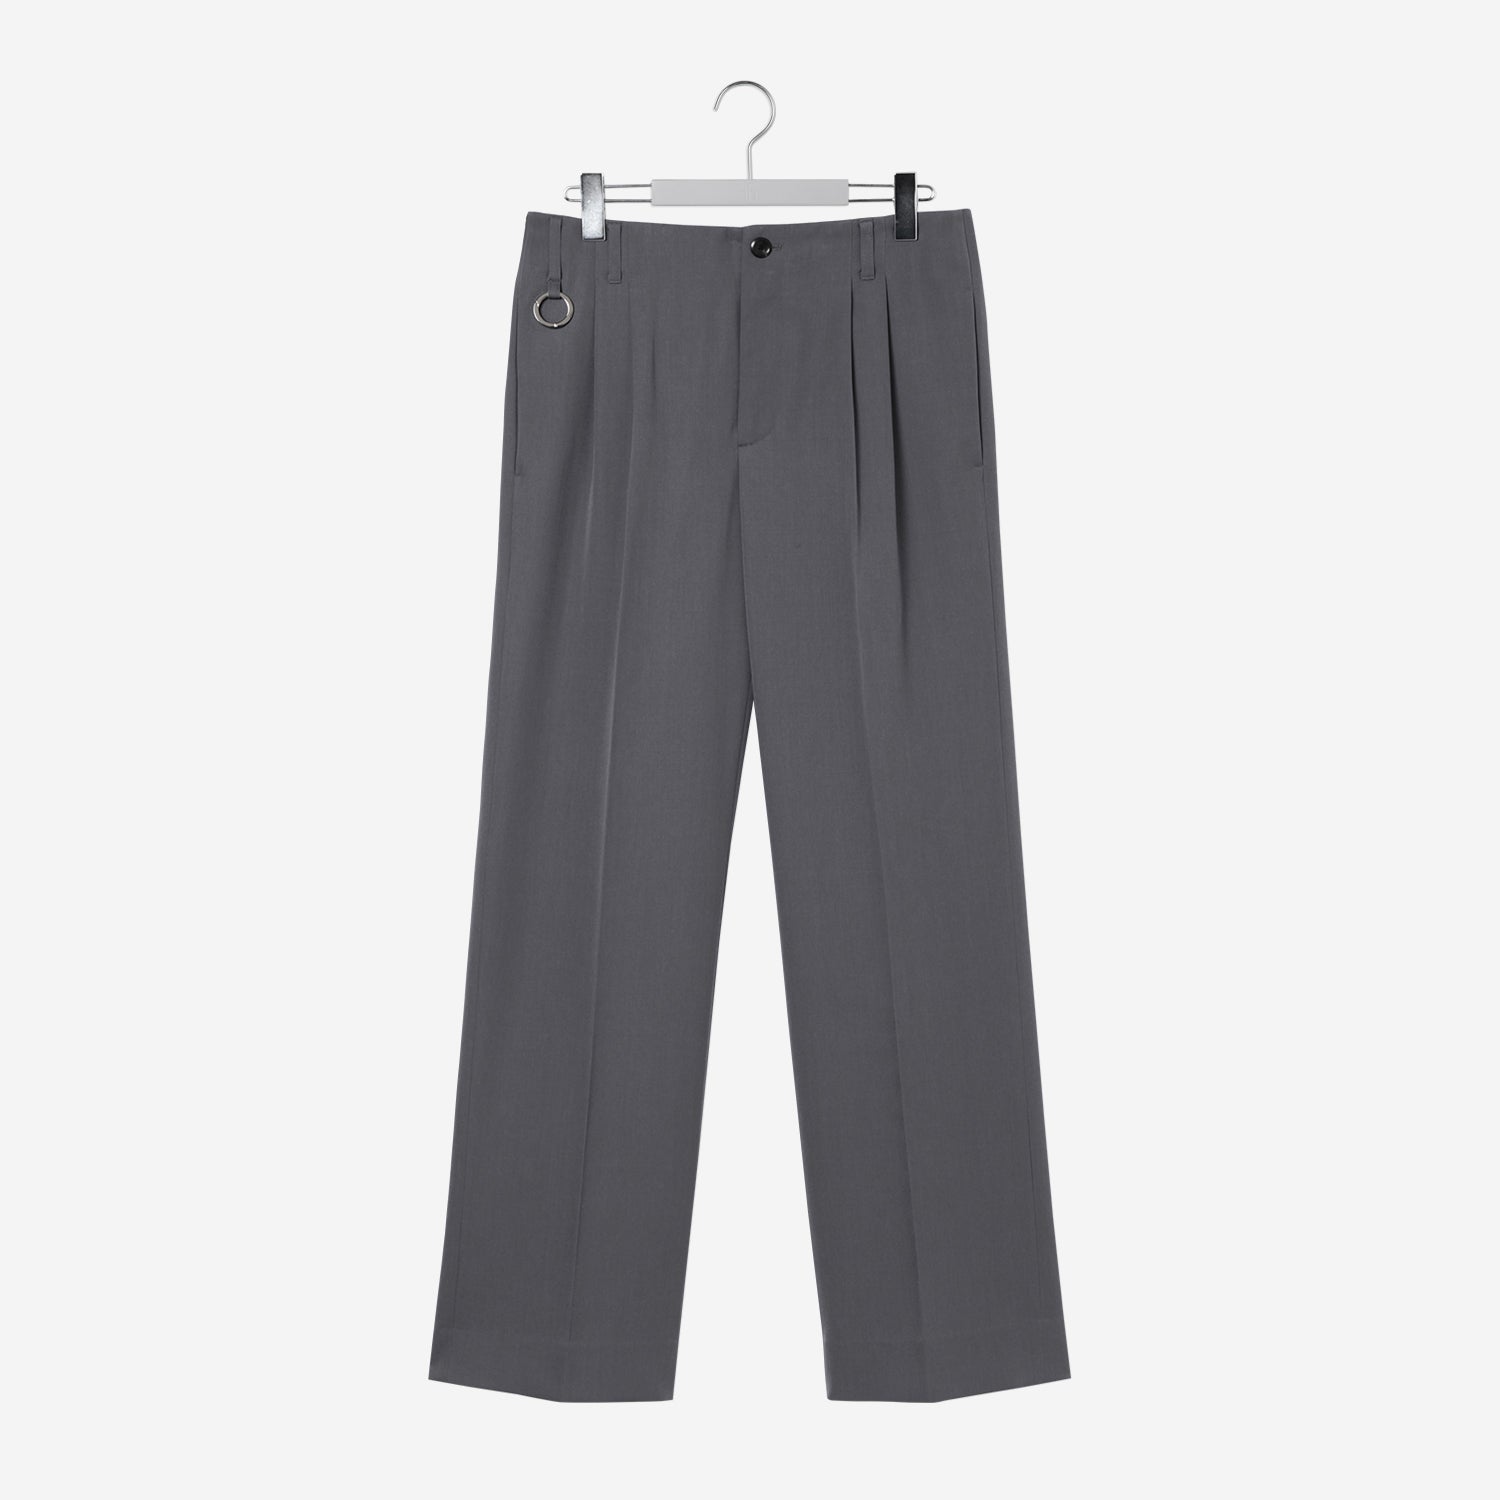 QUINN / Wide Tailored Pants / gray